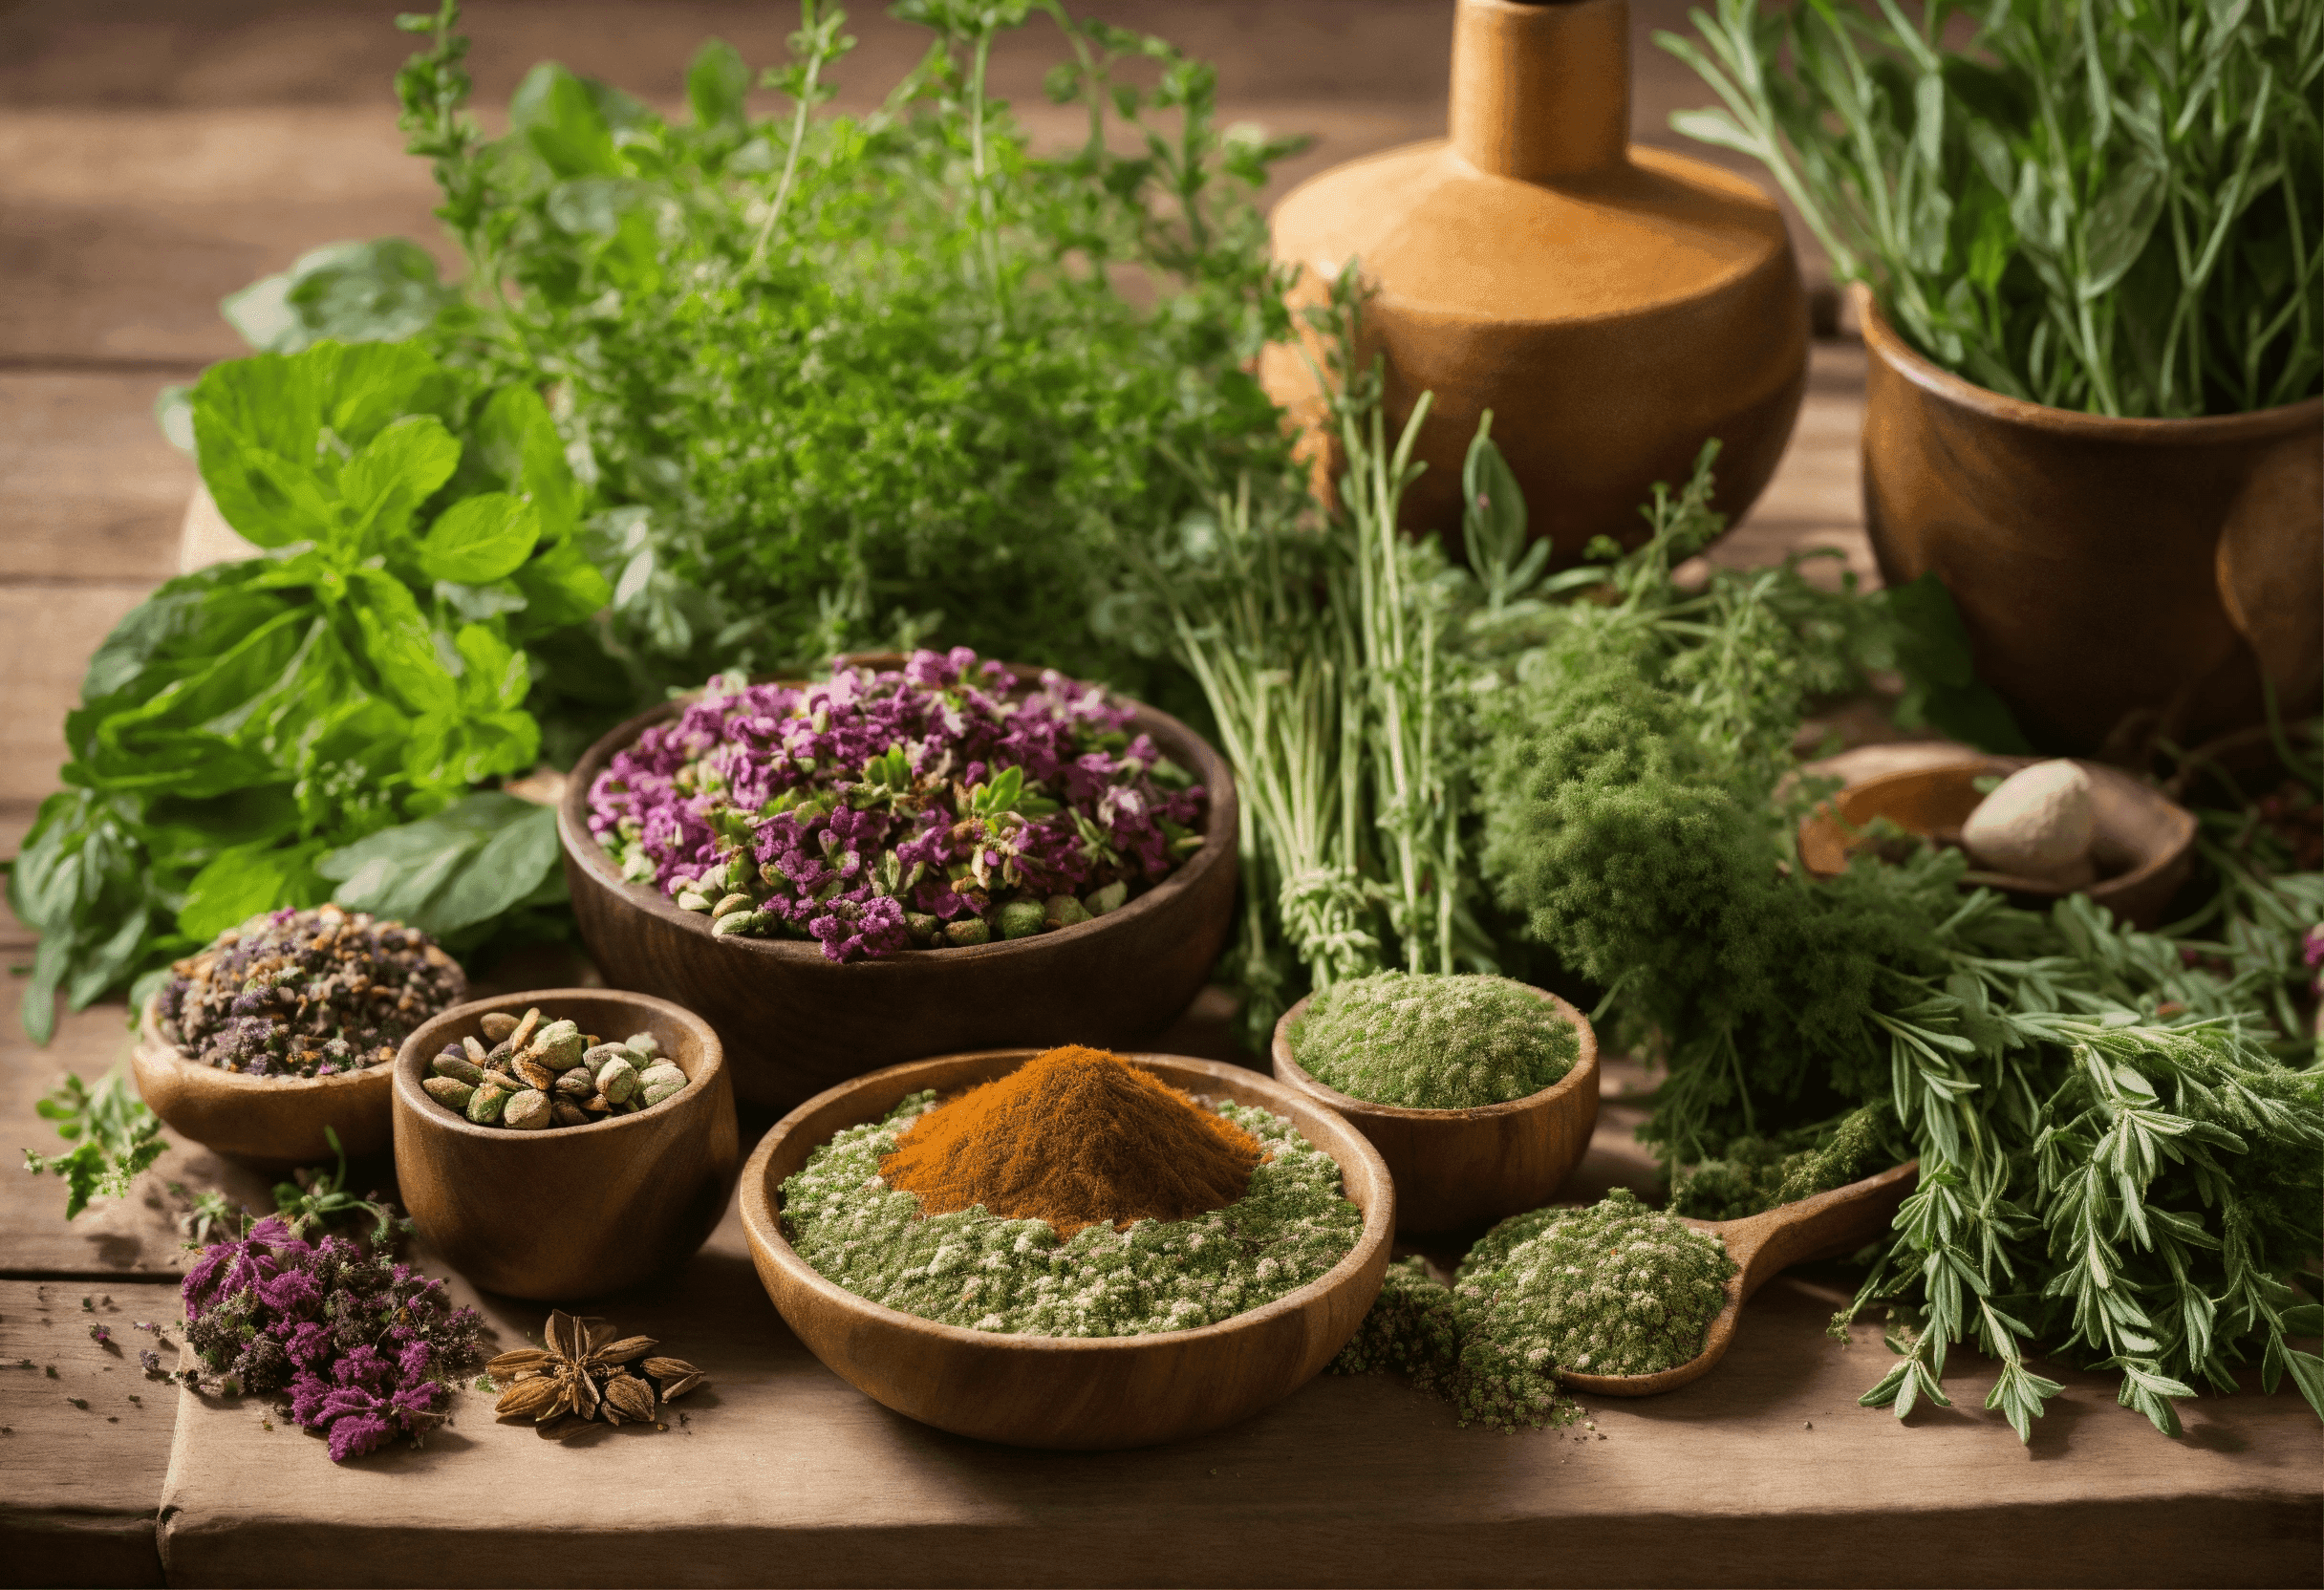 Natural Remedies: Alternative Medicine Approaches to Managing Anxiety